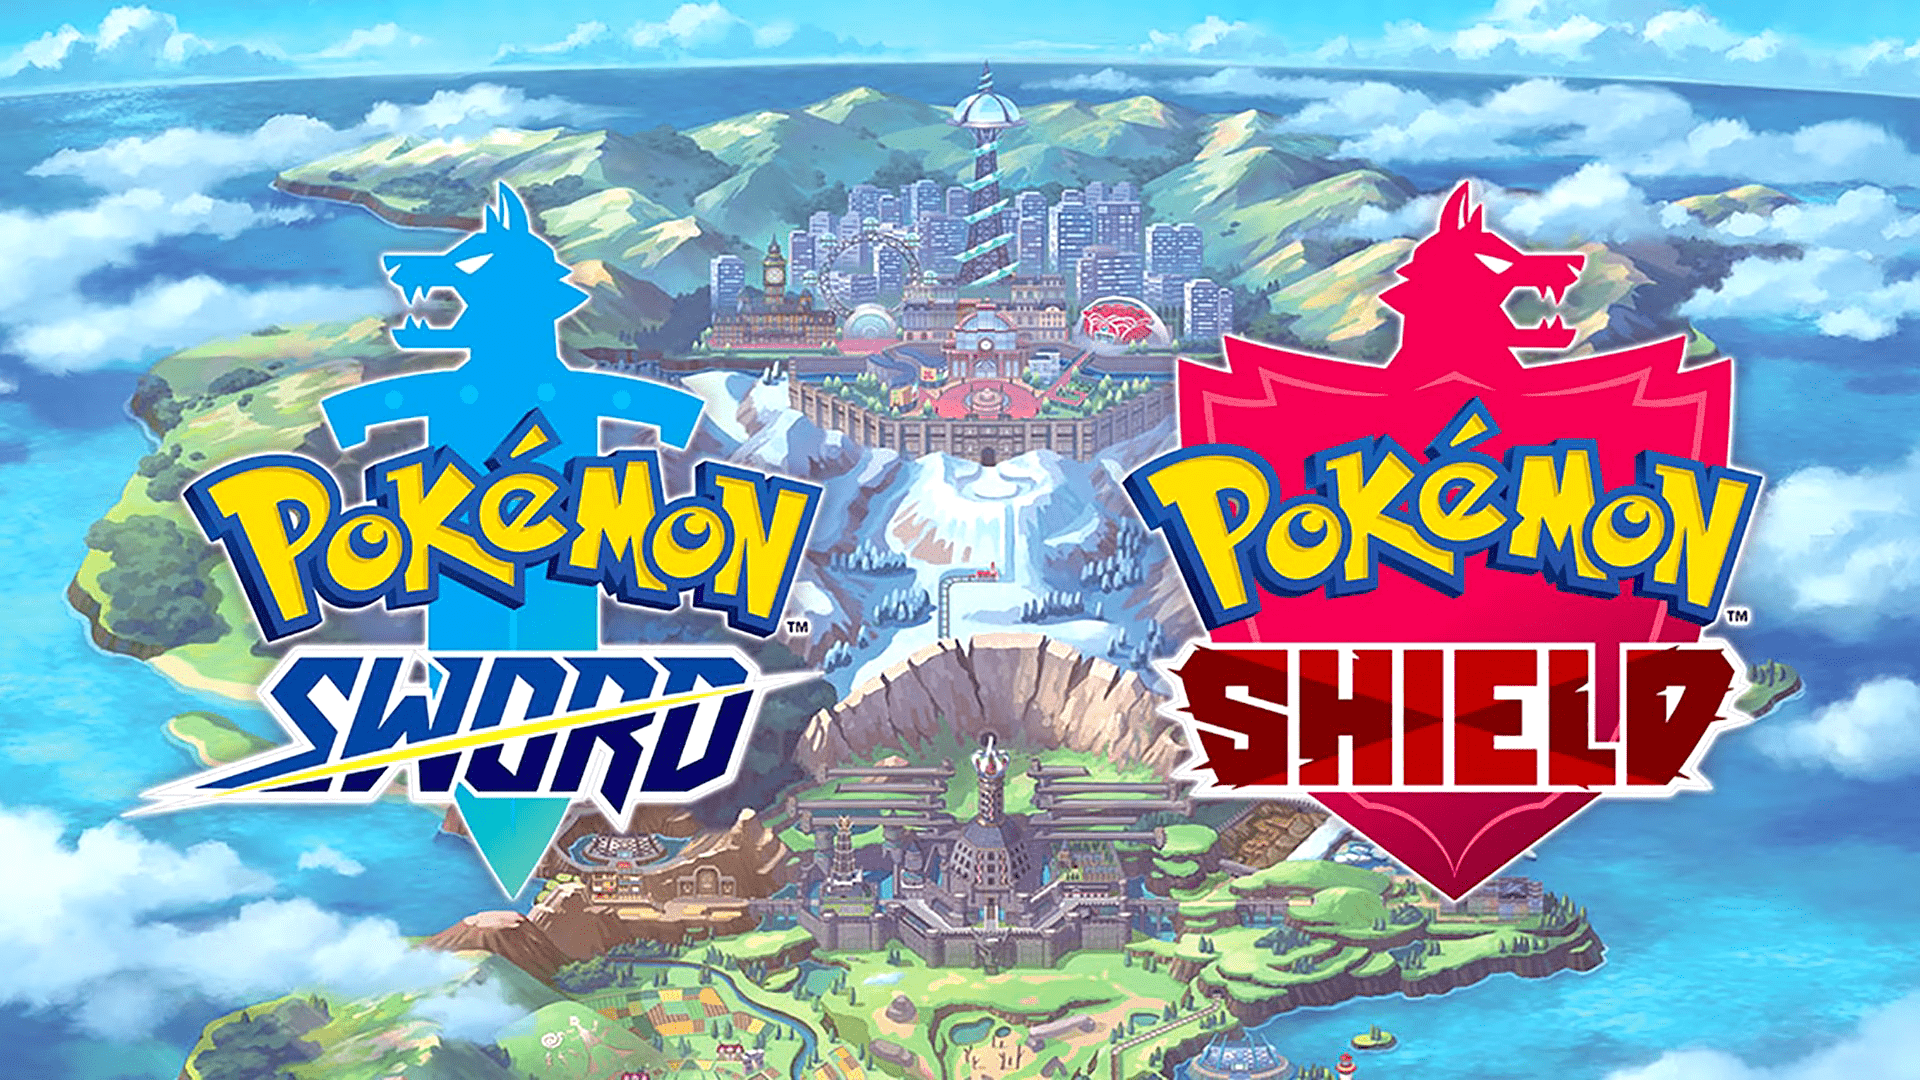 Catch Lots Of Shiny Magikarp In The Pokemon Sword And Shield Max Raid Event, Start Your New Year With The Shiniest Fish In The Sea